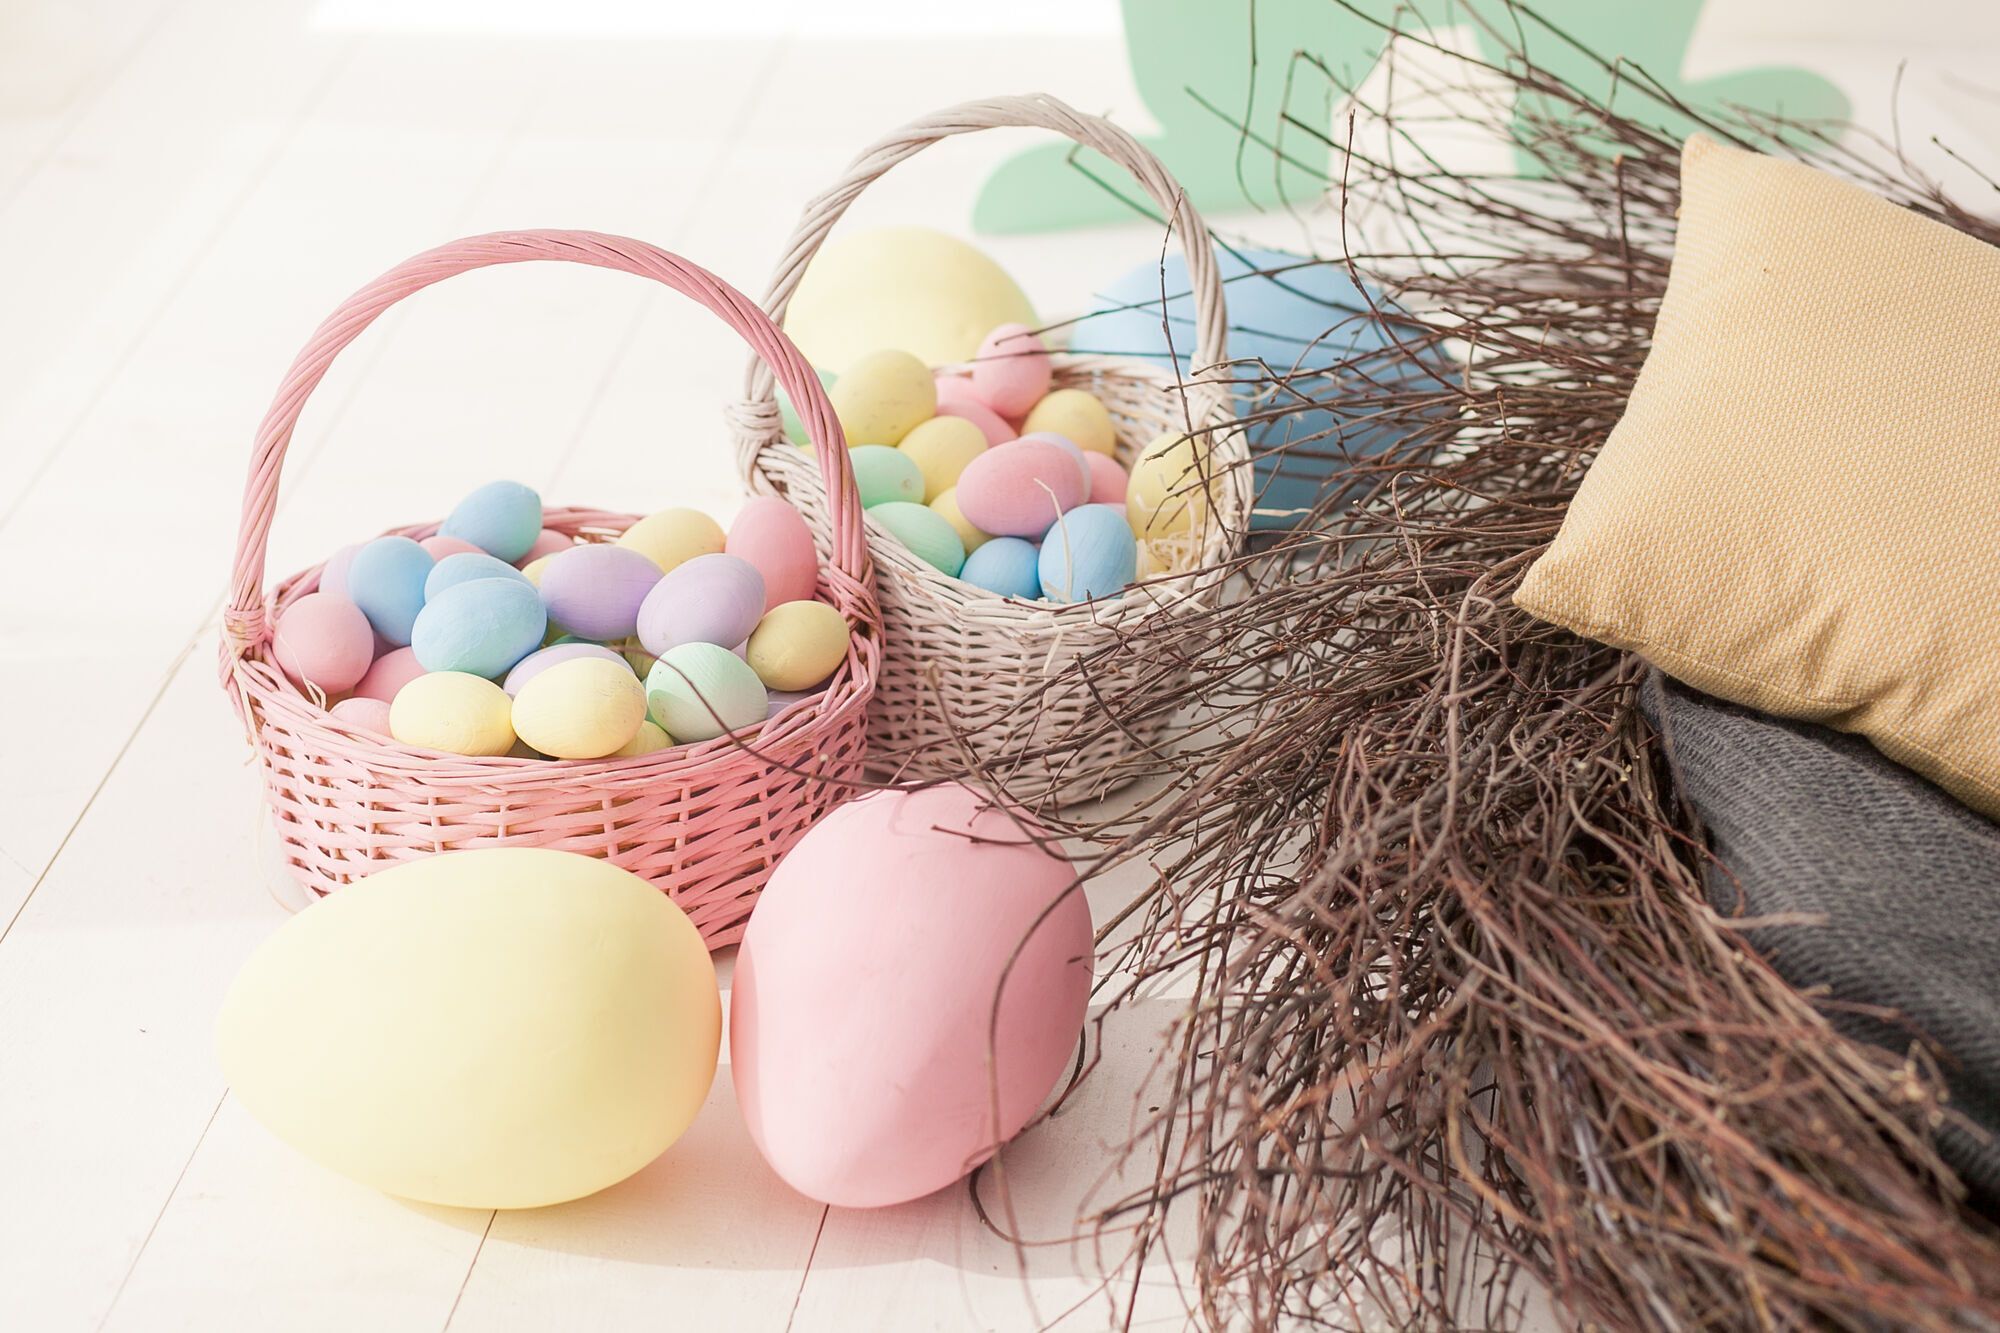 What to put in the Easter basket and what to avoid: useful tips